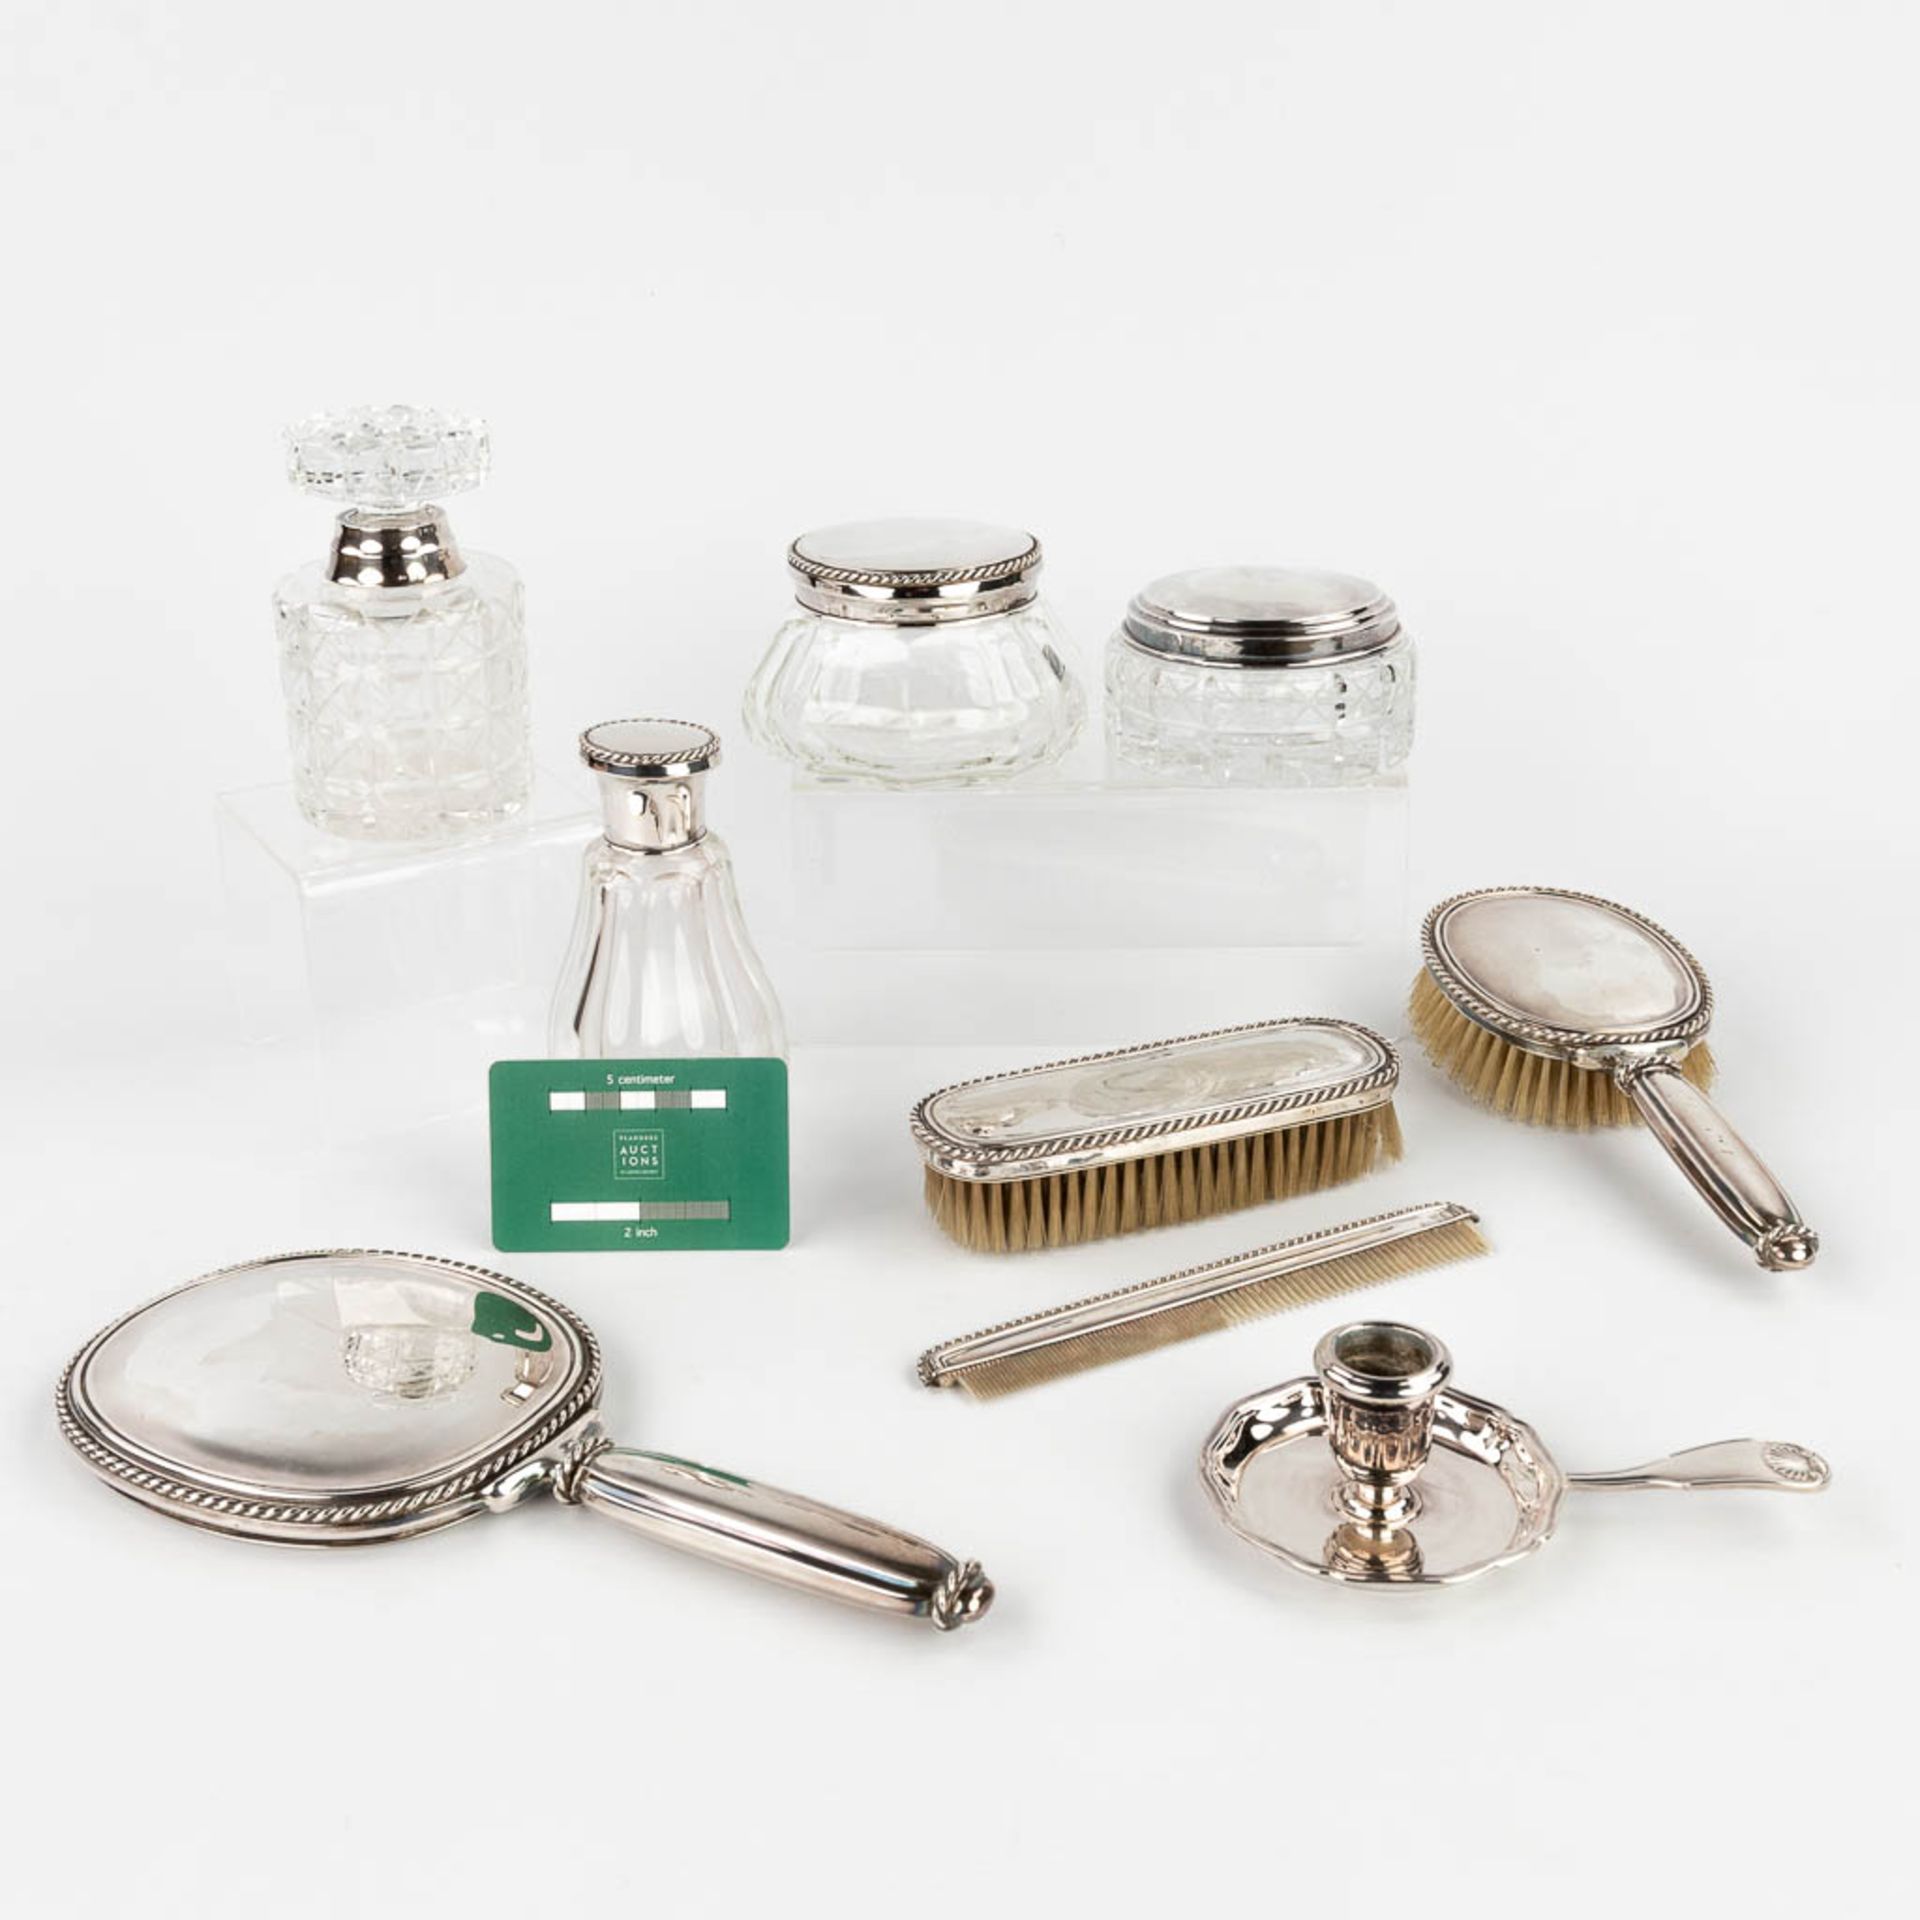 A collection of toilet accessories and goods, crystal, silver and silver-plated metal. (H: 12 cm) - Bild 2 aus 19